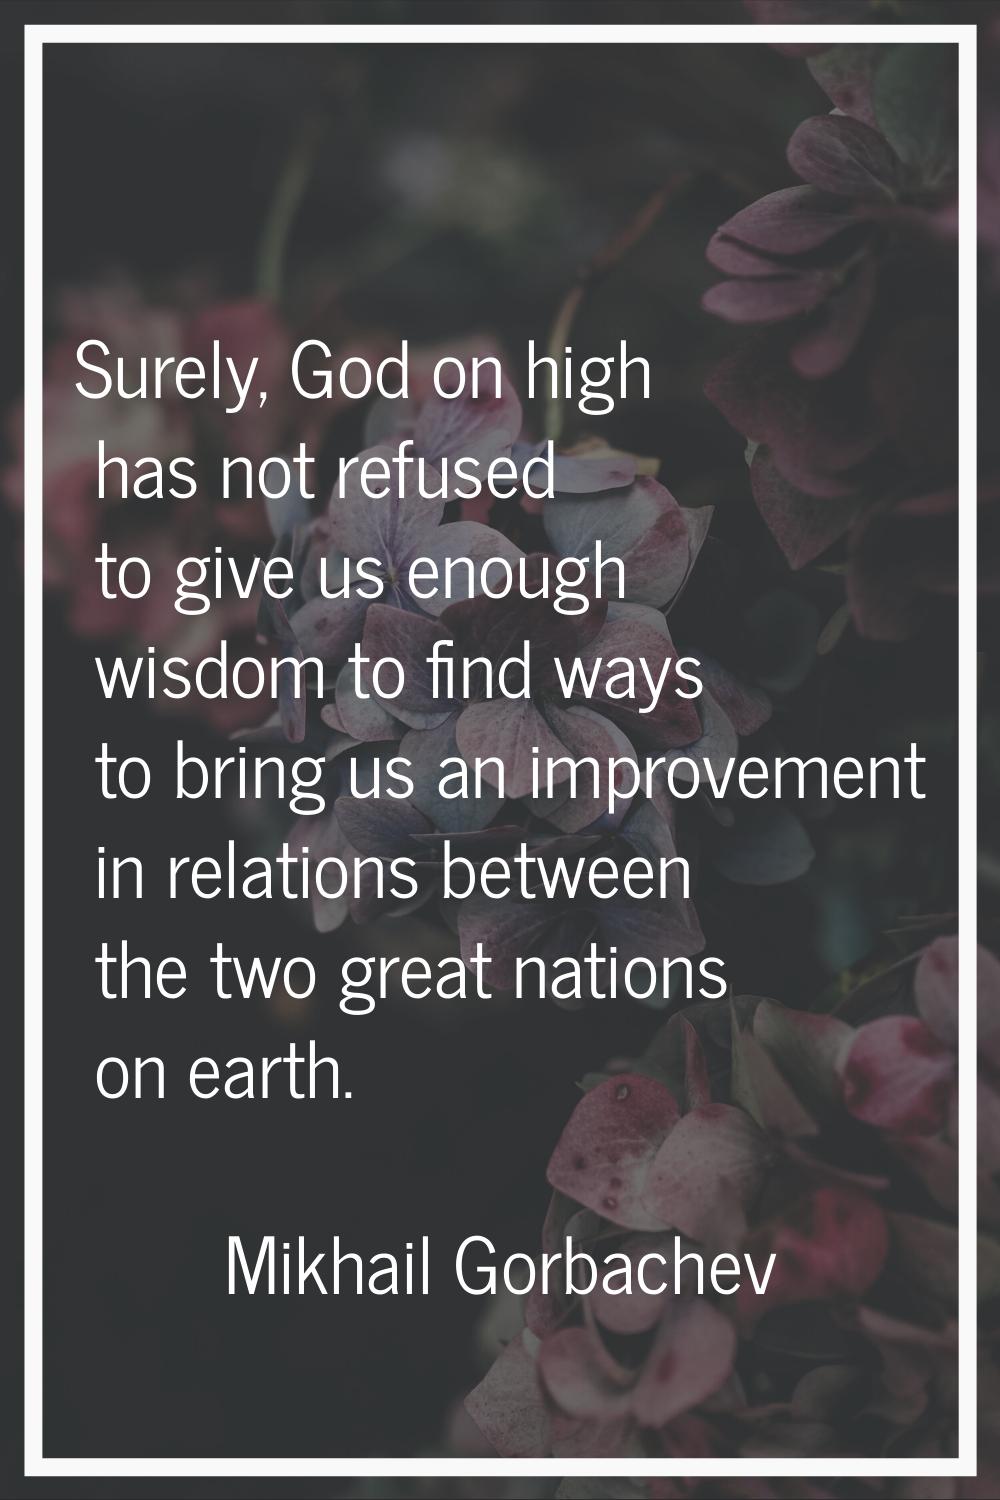 Surely, God on high has not refused to give us enough wisdom to find ways to bring us an improvemen